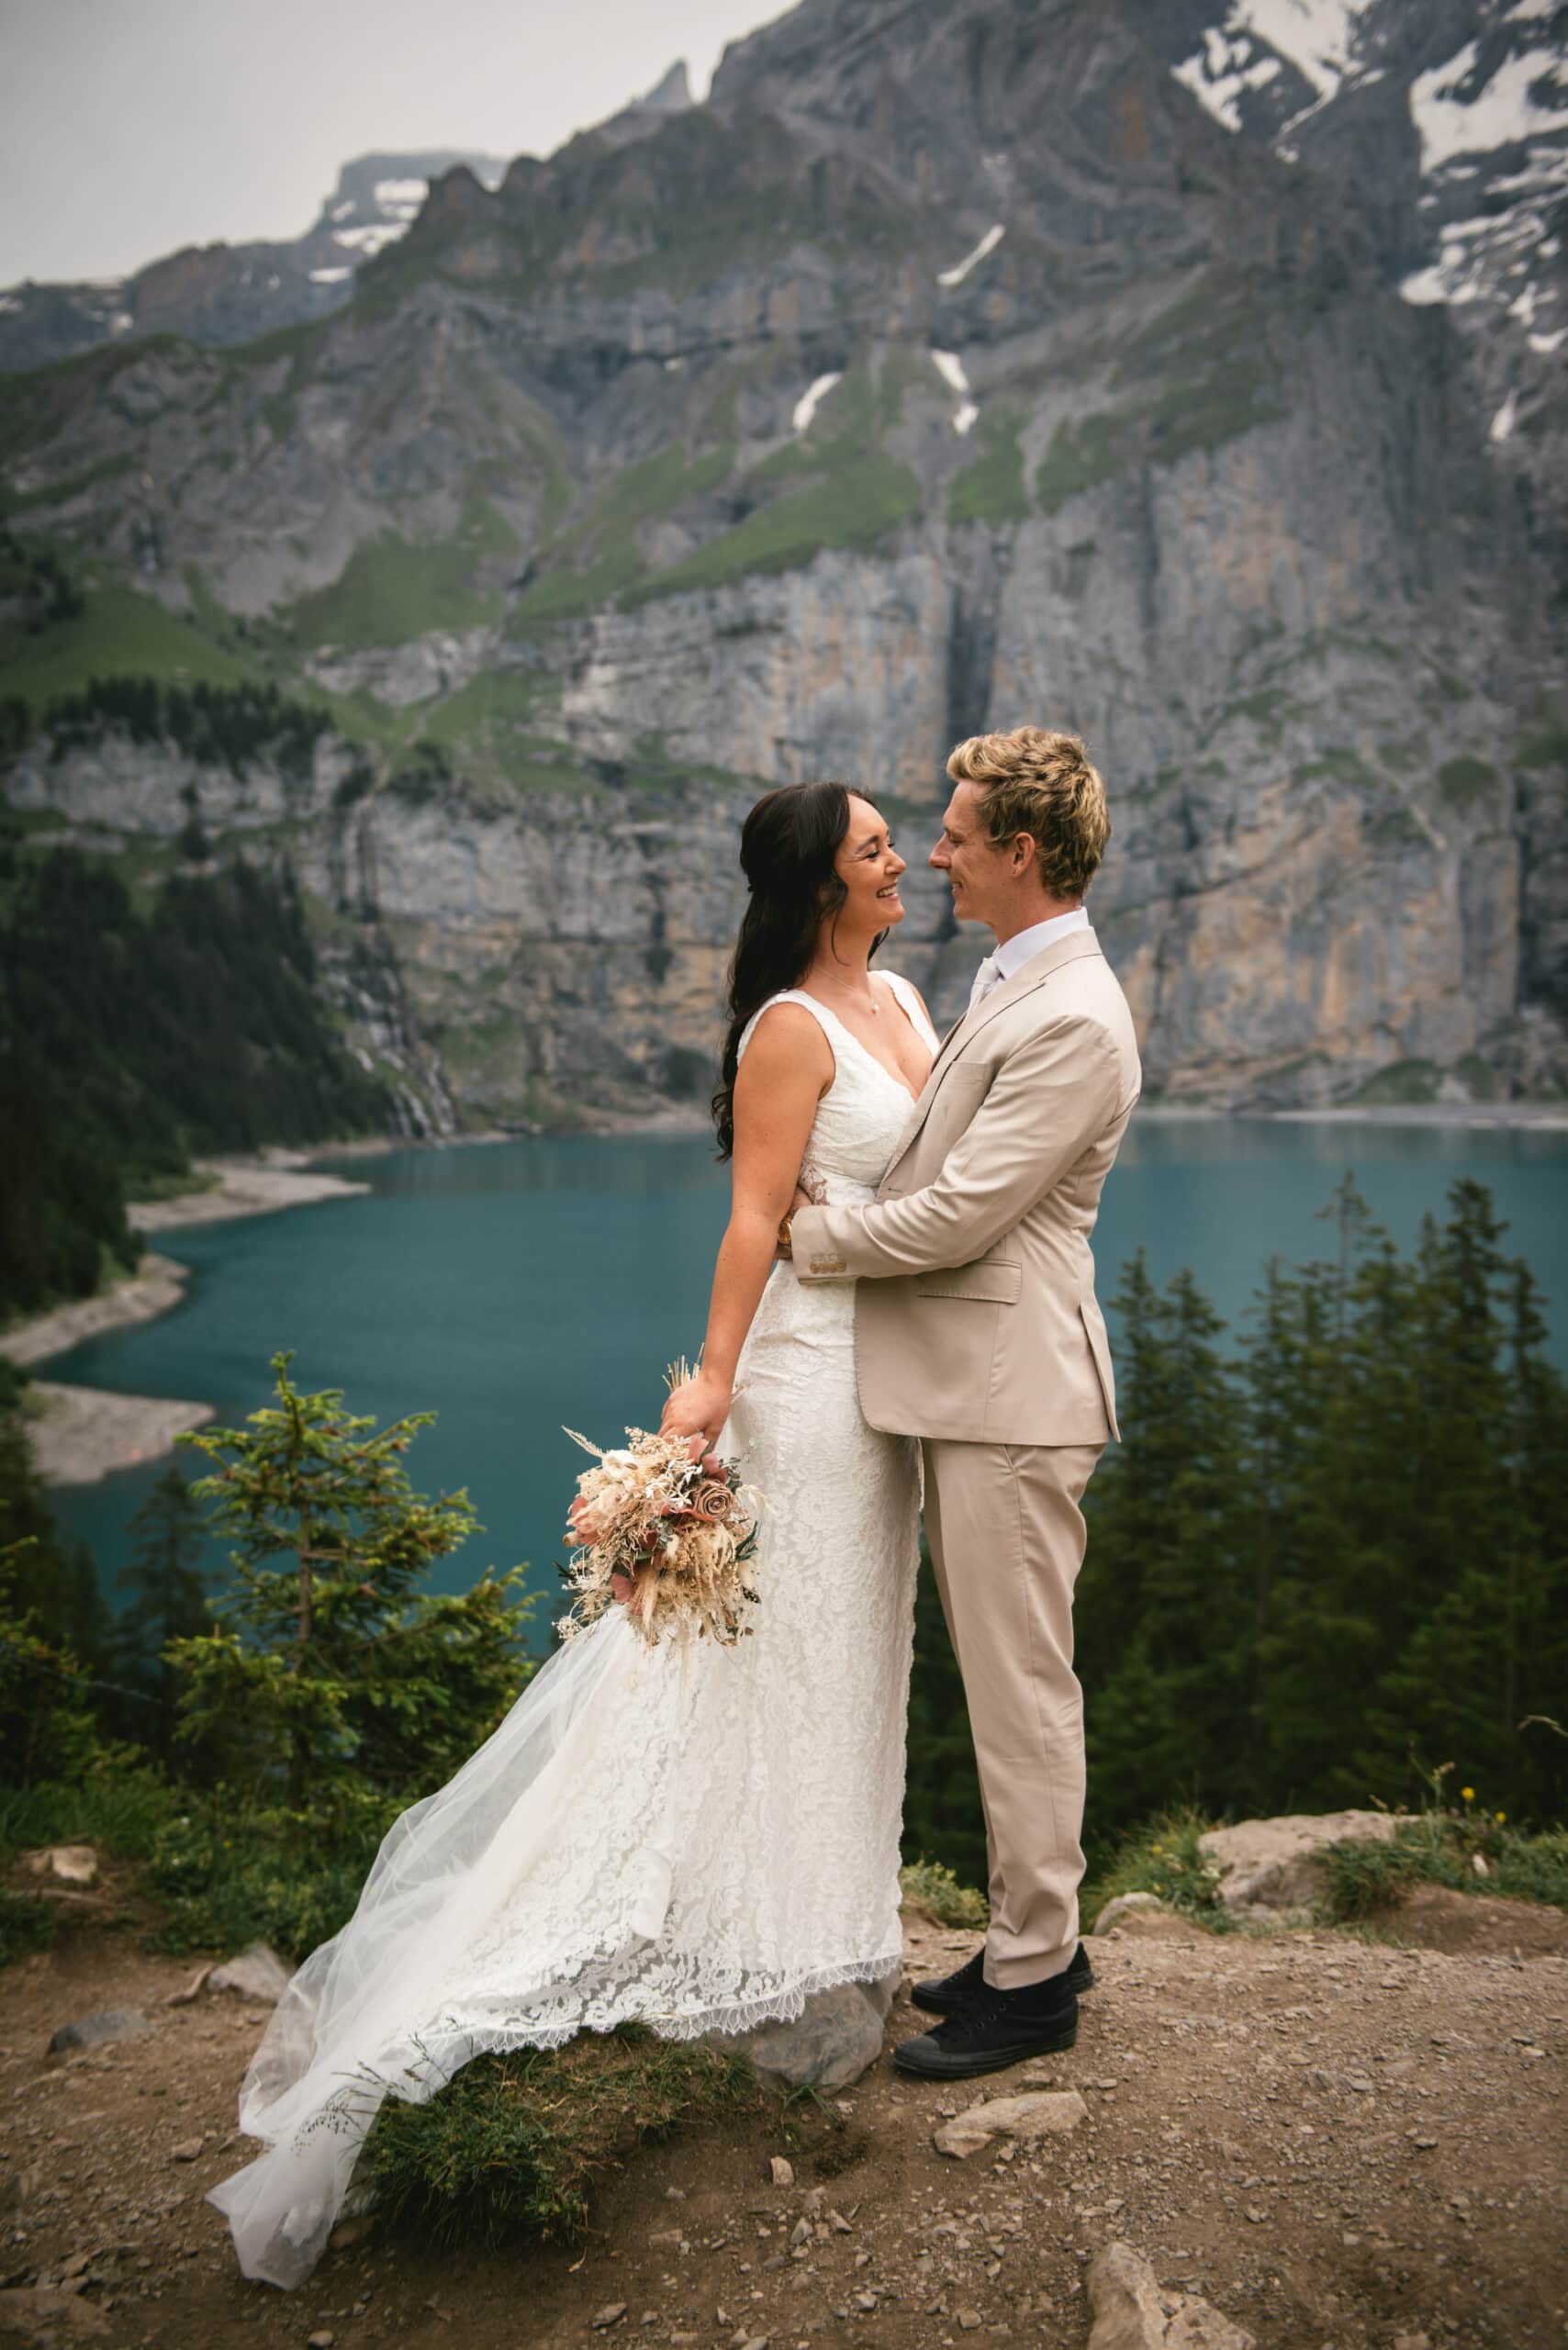 A love story elevated by alpine beauty - Emily & Luke's hiking elopement.